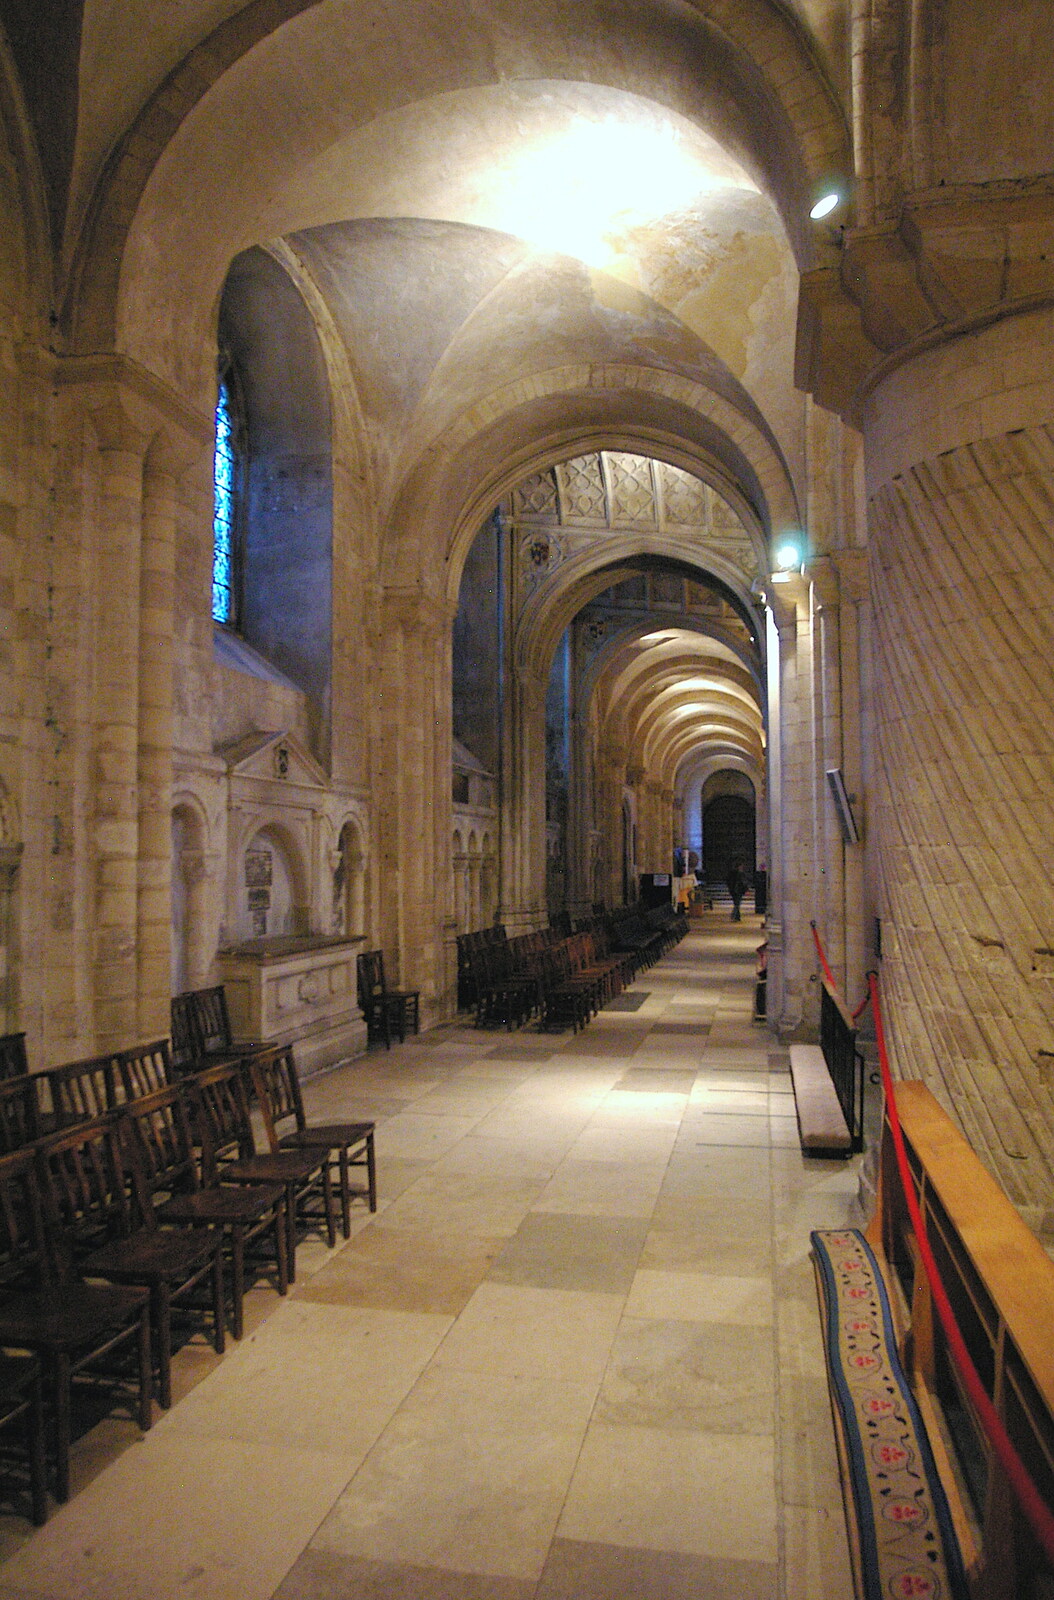 CISU Networks and Autumn Leaves at Norwich Cathedral, Eye and Norwich - 29th October 2005: Distinctive spiralled columns on the right